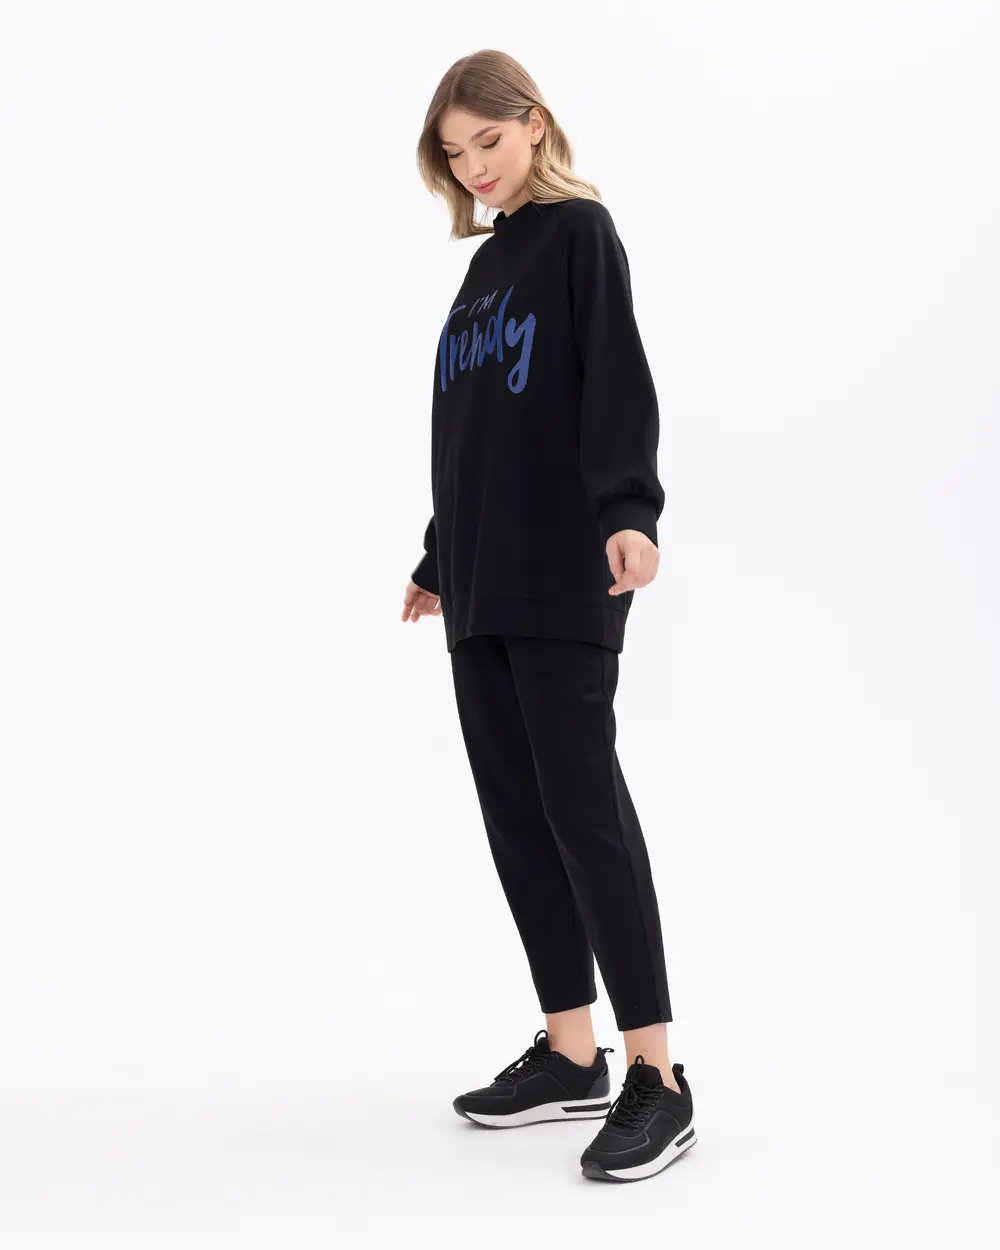 Stone Embroidered Letter Pattern Sweatshirt